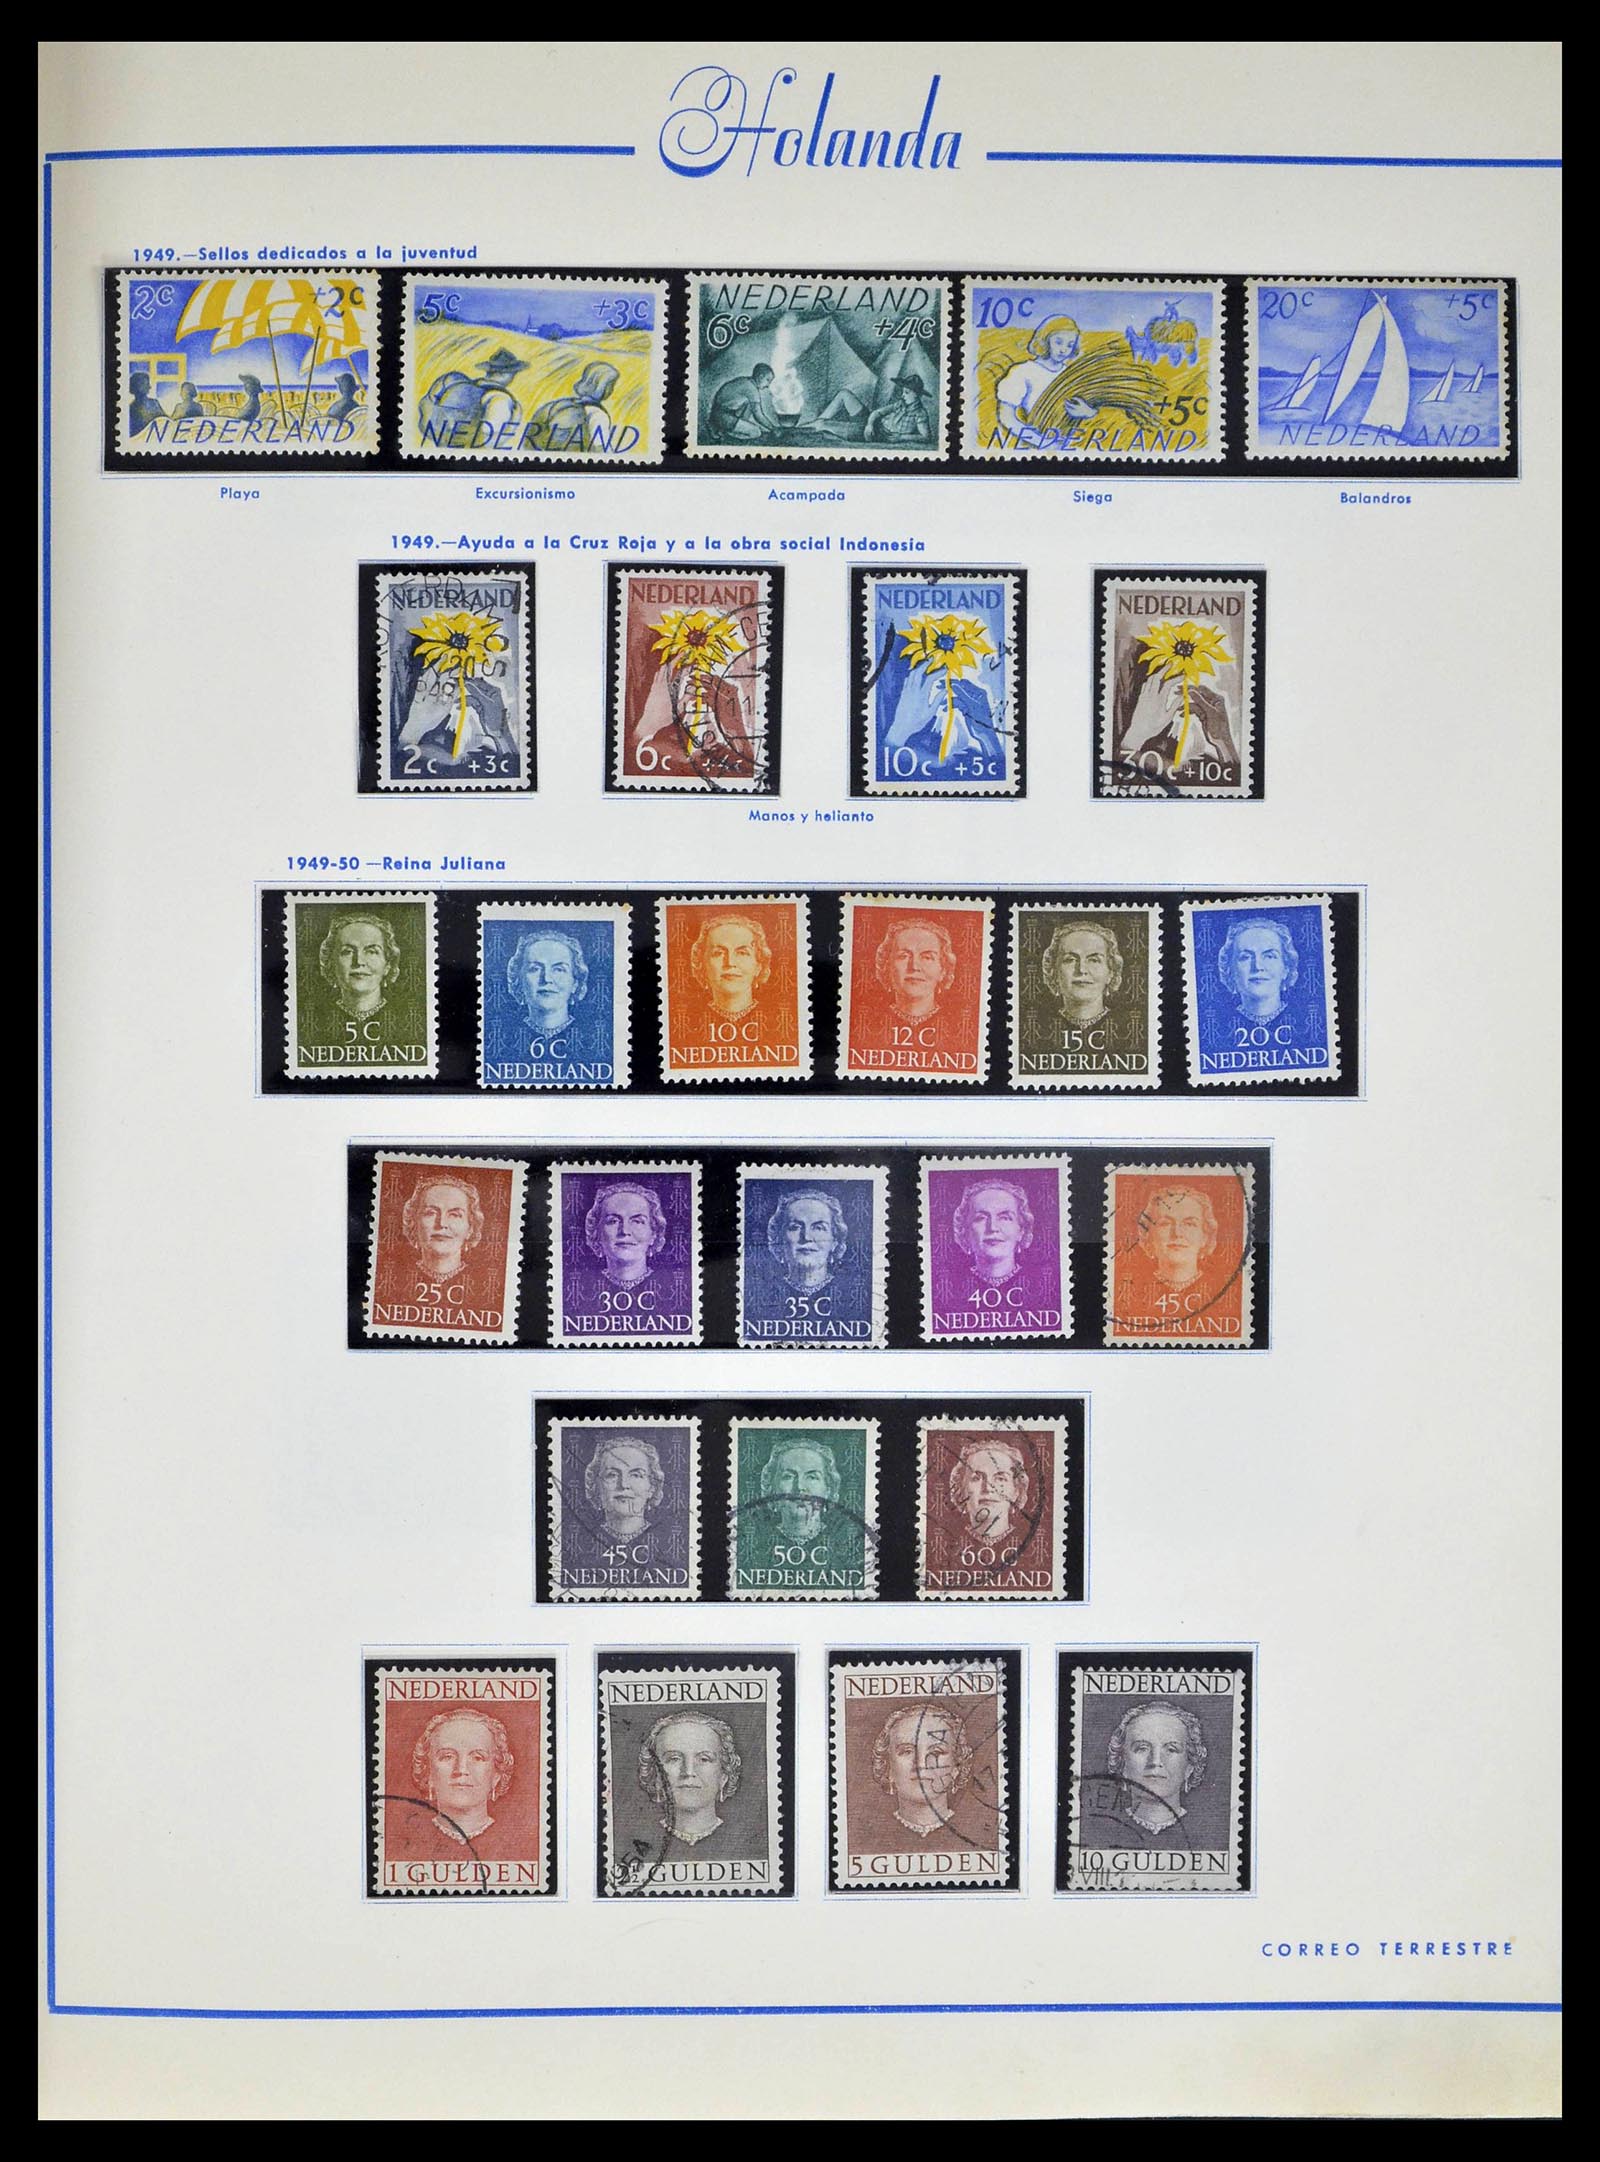 39234 0026 - Stamp collection 39234 Netherlands 1852-1975.